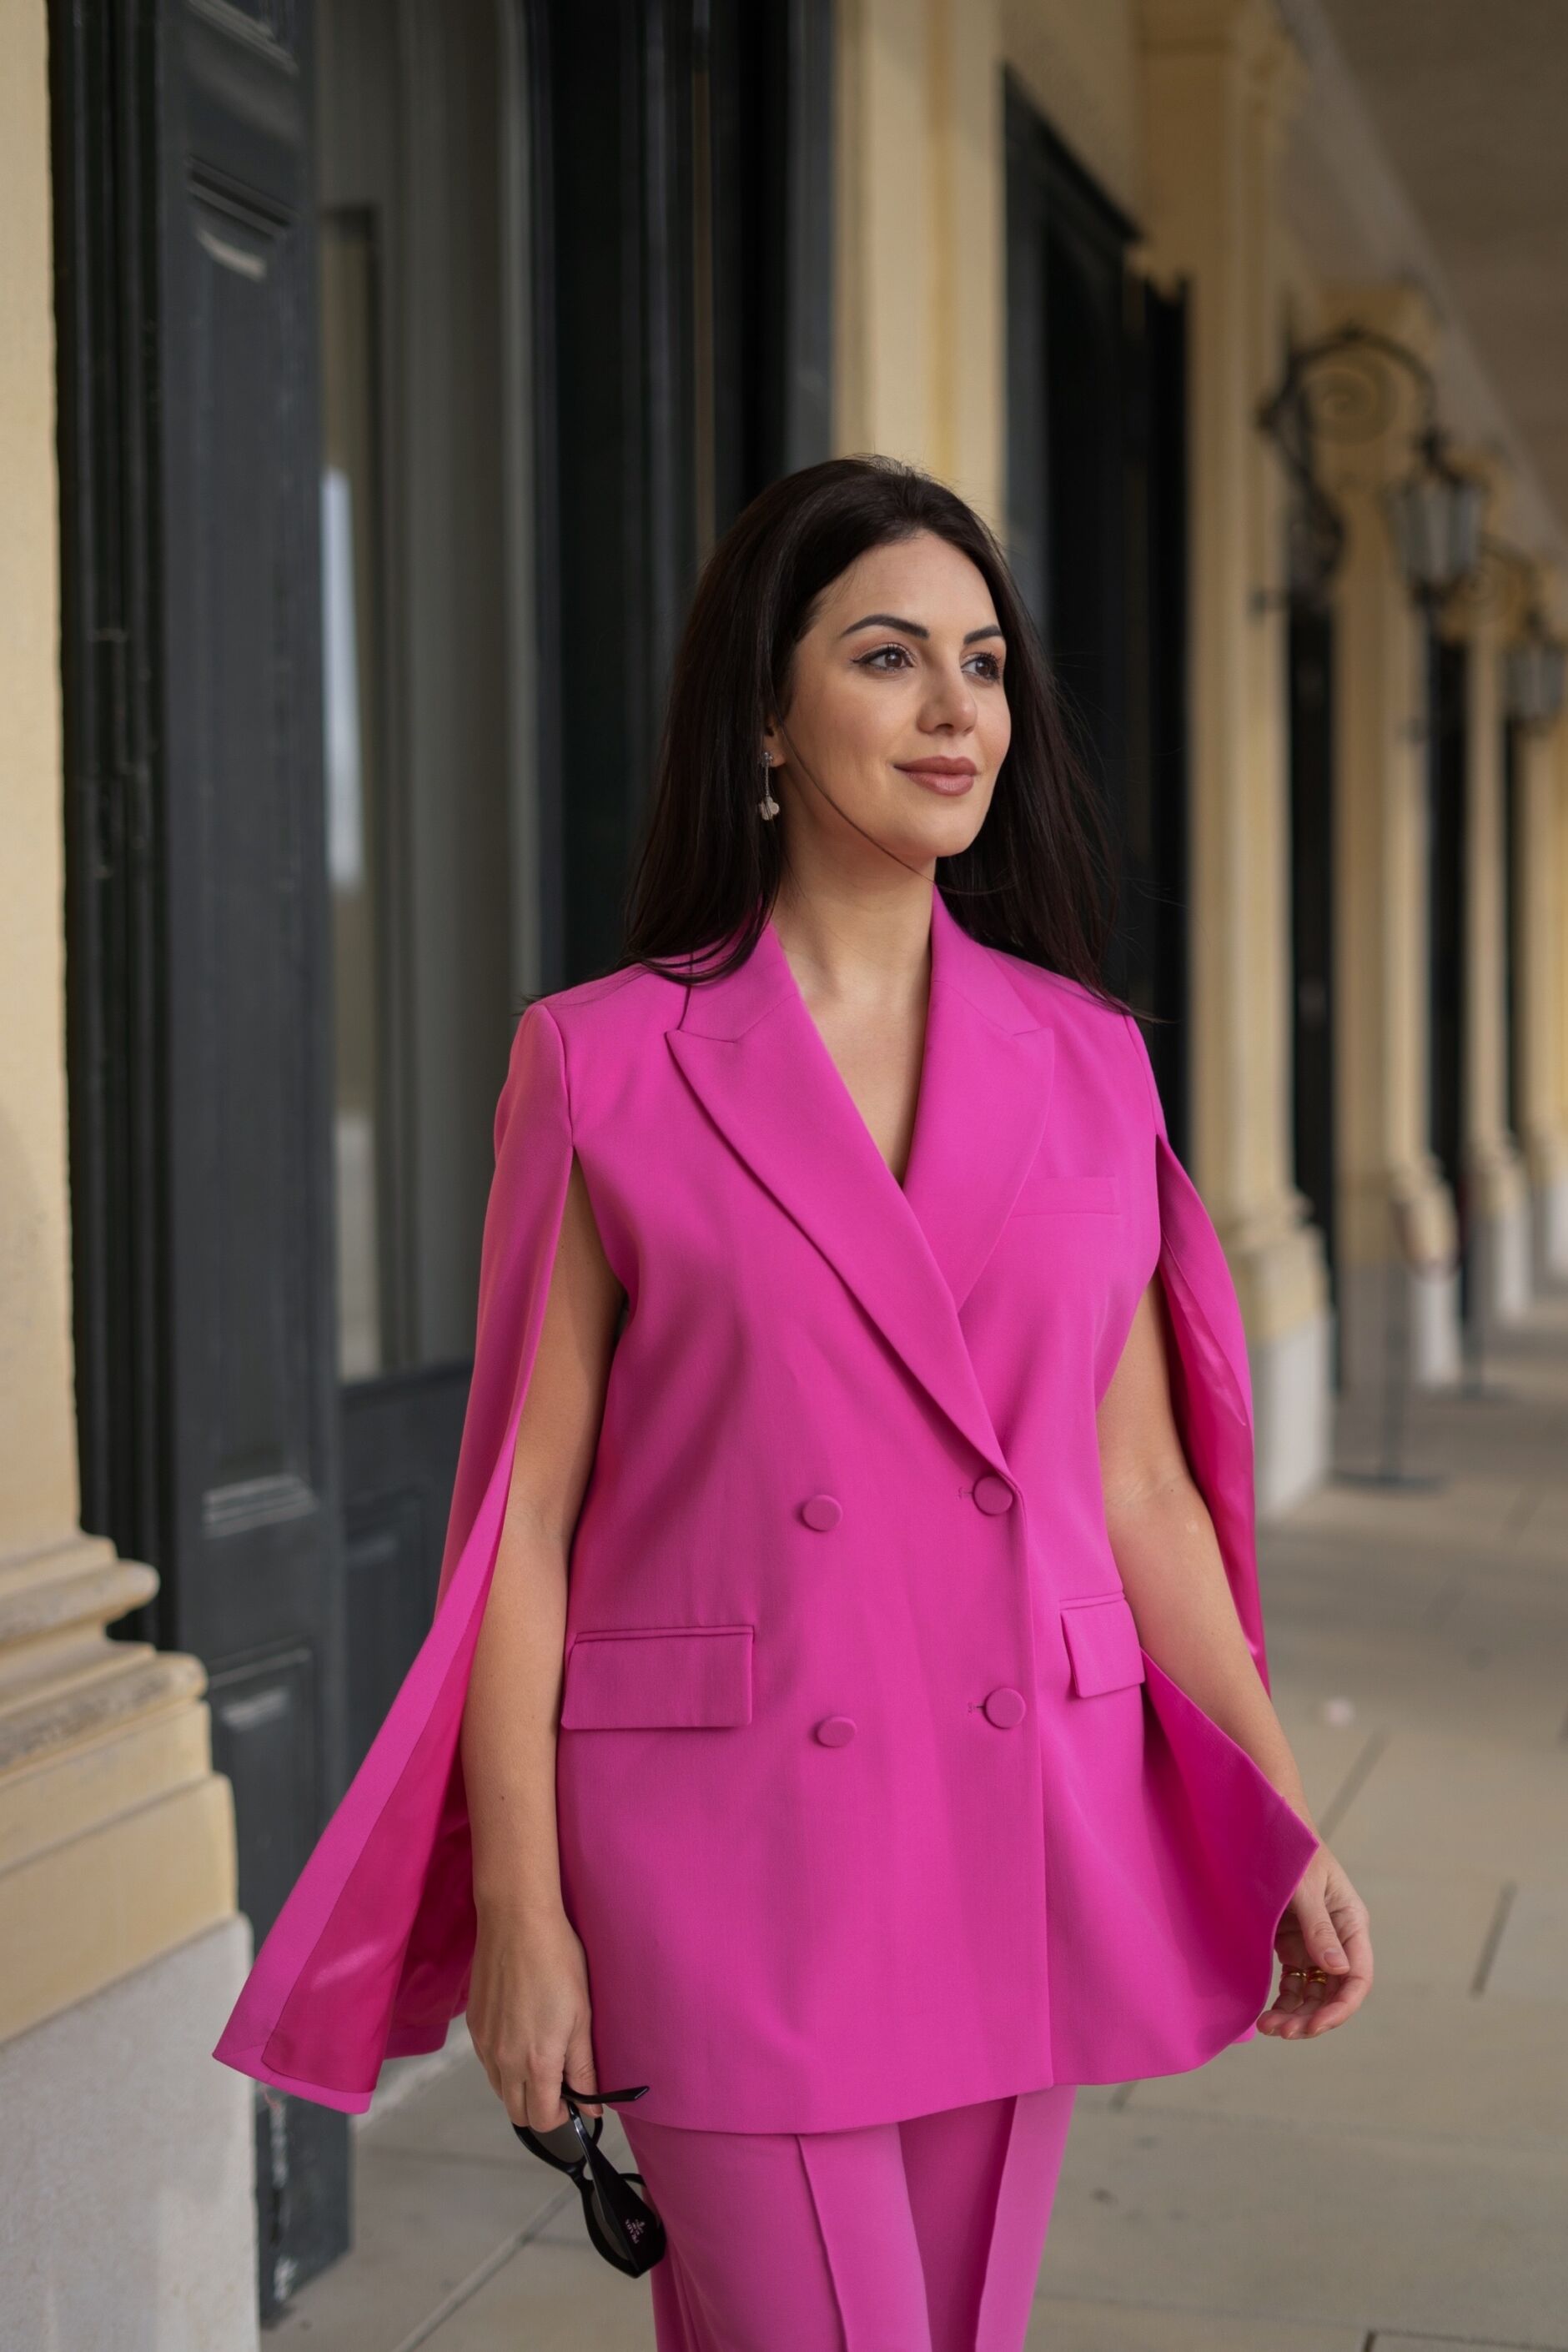 FASHION MEMO: HOT PINK WILL BE THE NEXT BIG THING